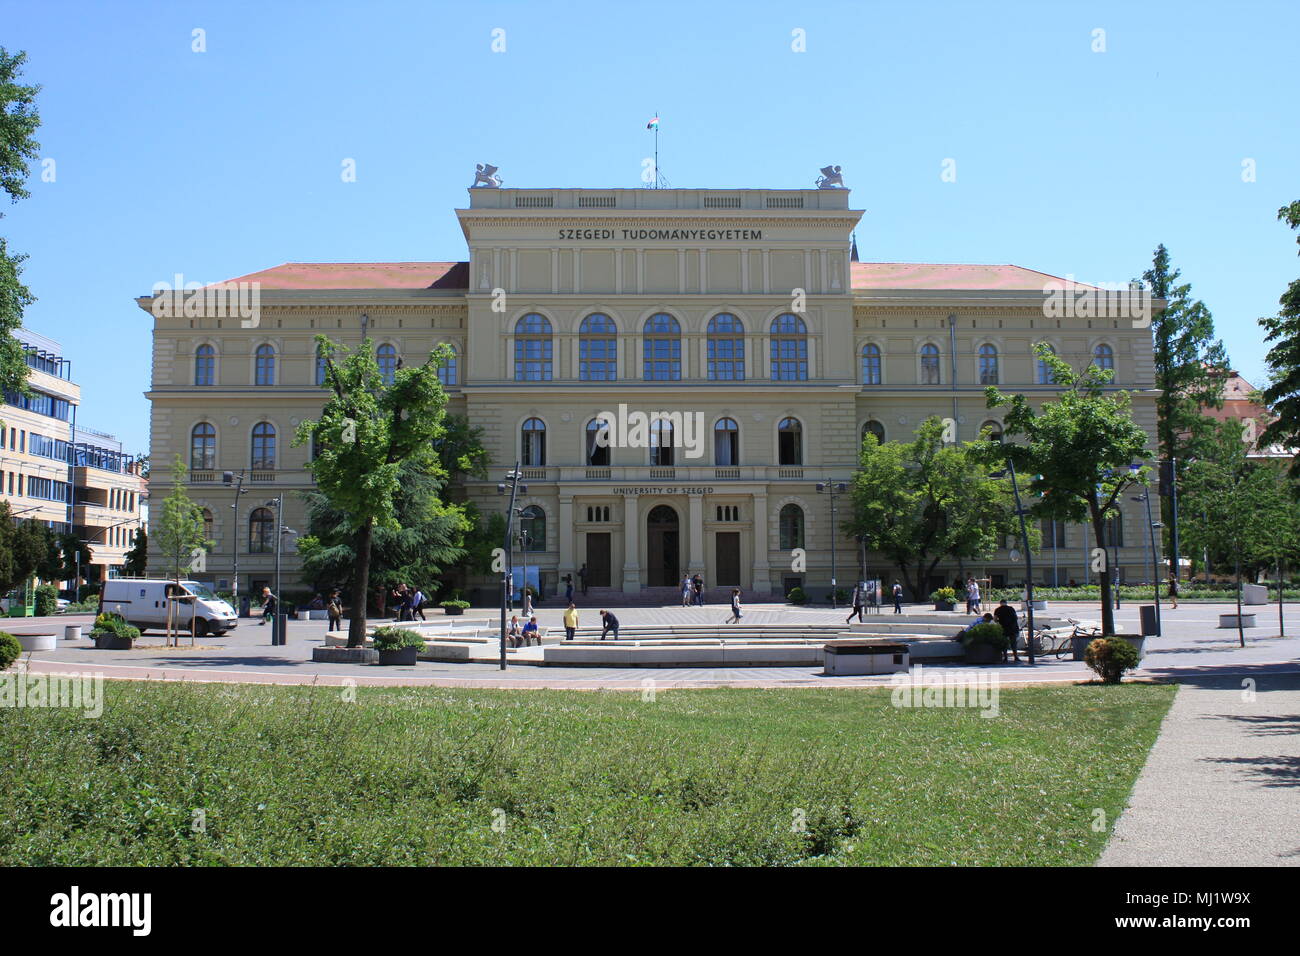 The University of Szeged, located on the Dugonich square. Stock Photo